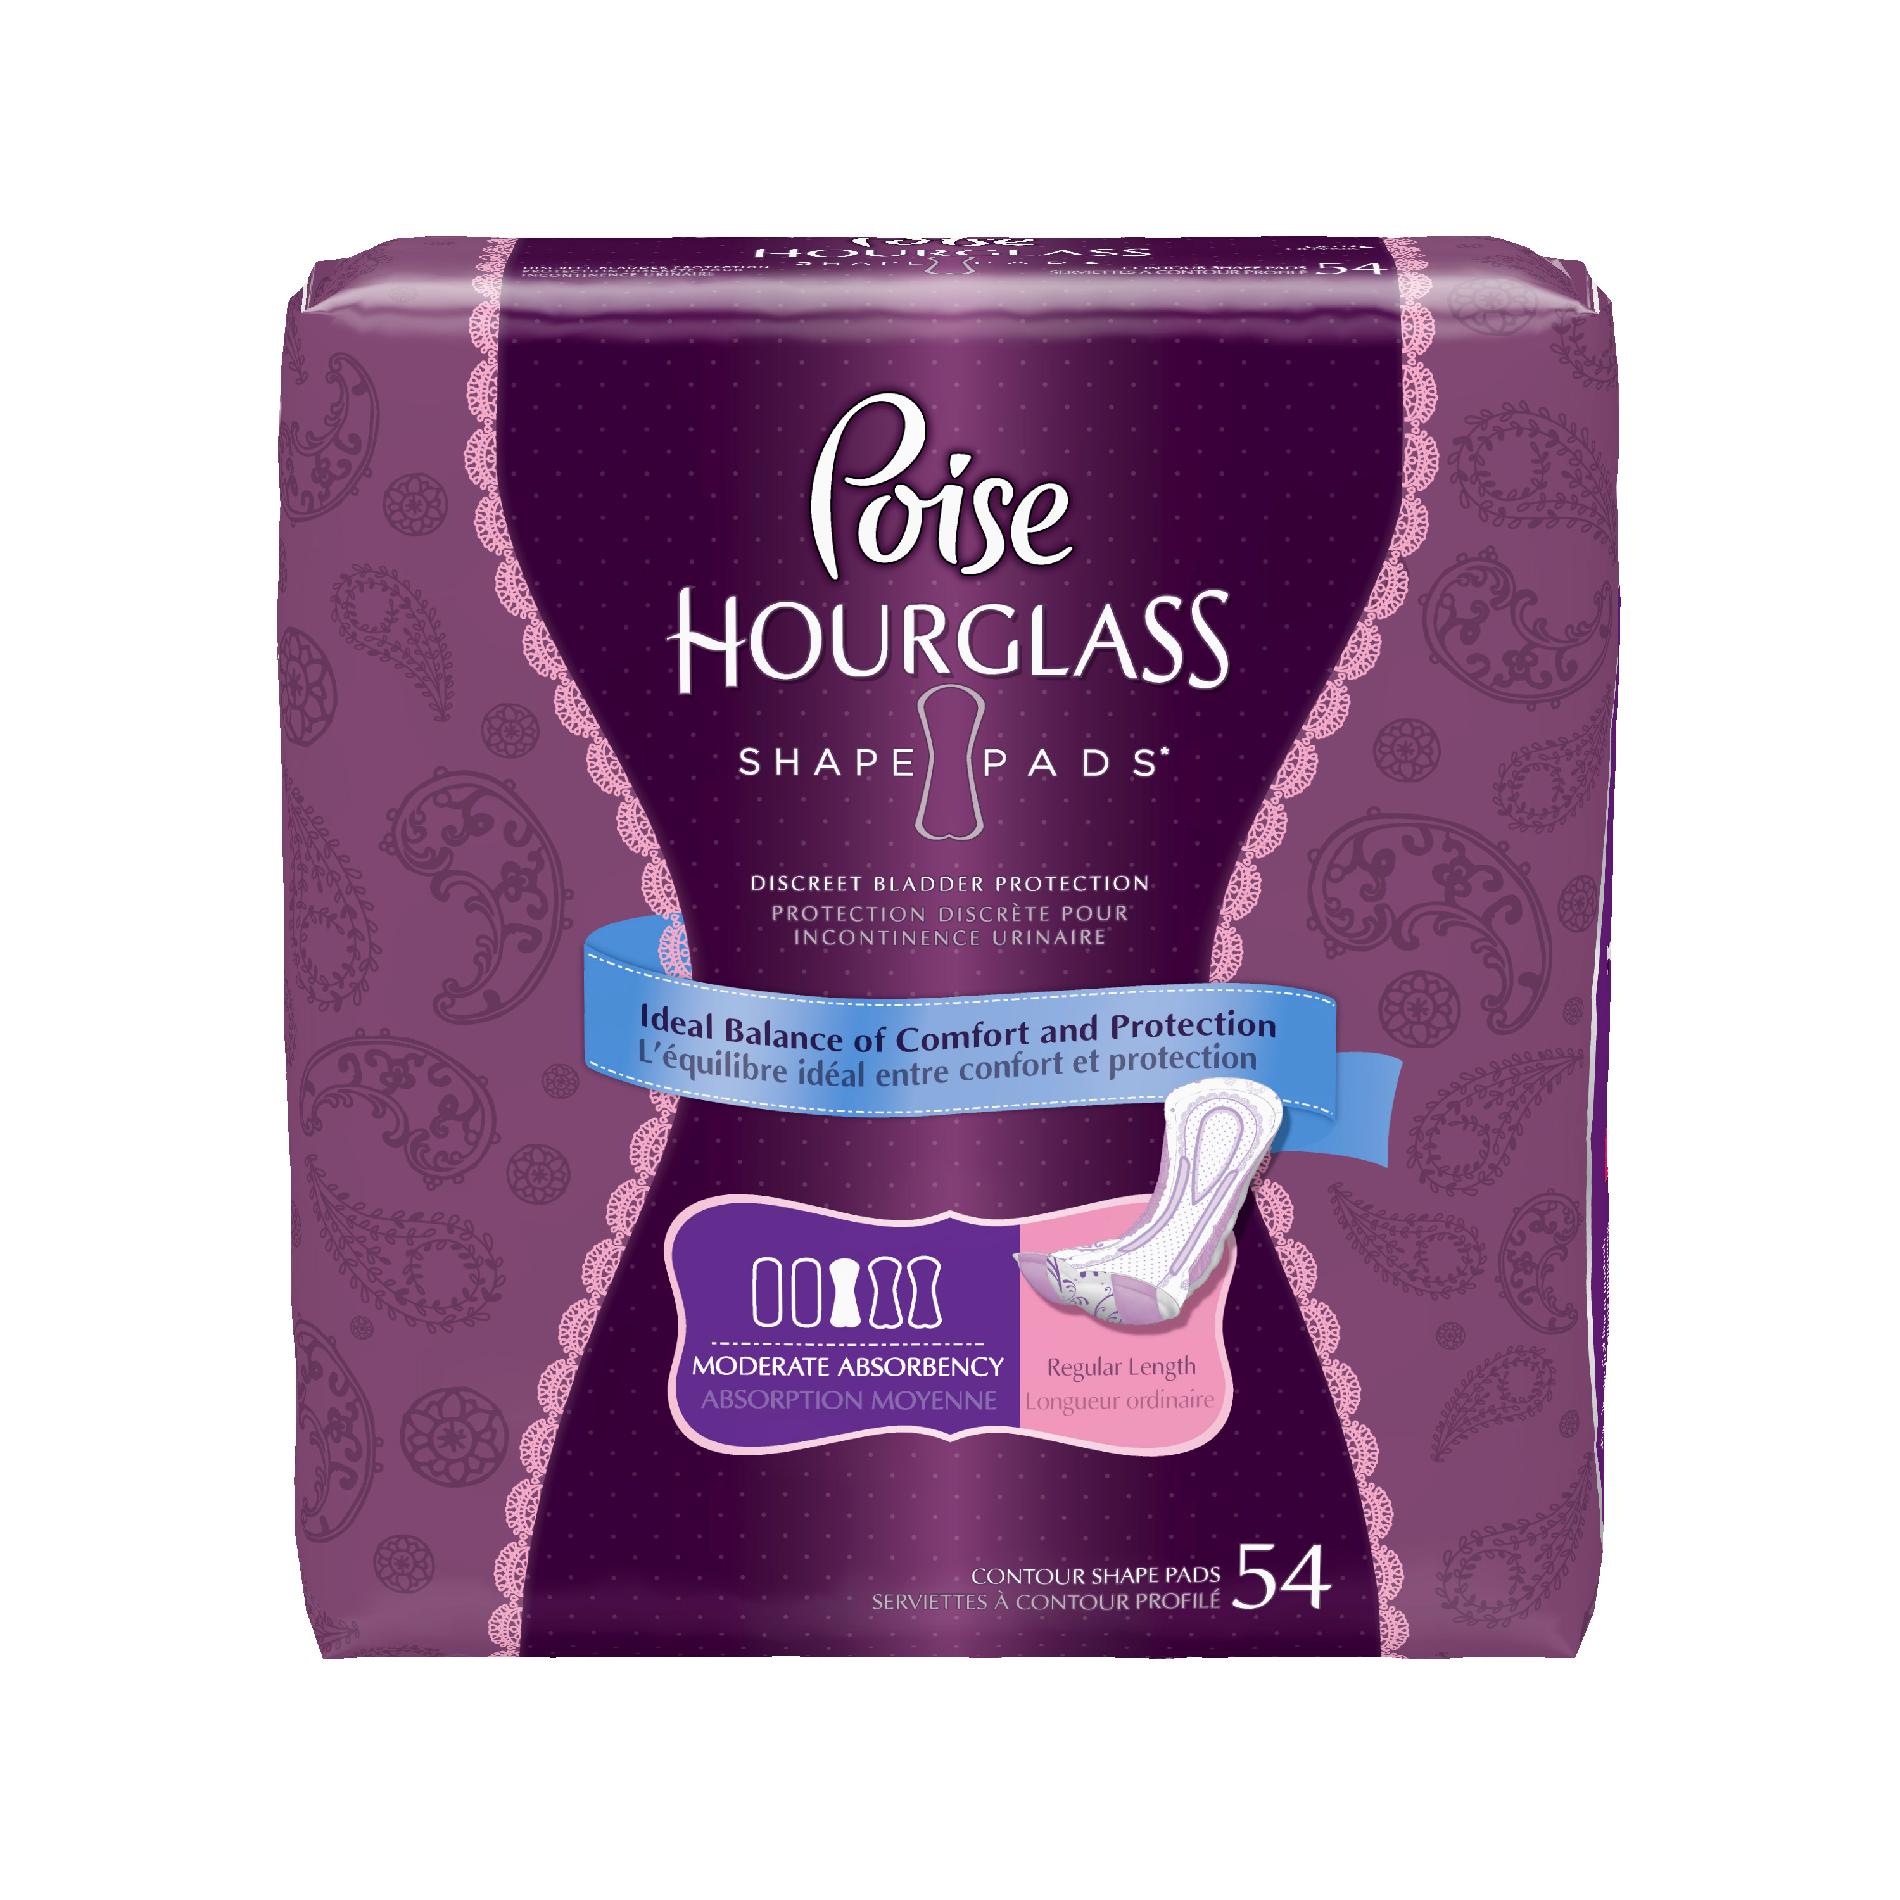 Poise Hourglass Moderate Absorbency Pads, Regular Length, 54ct